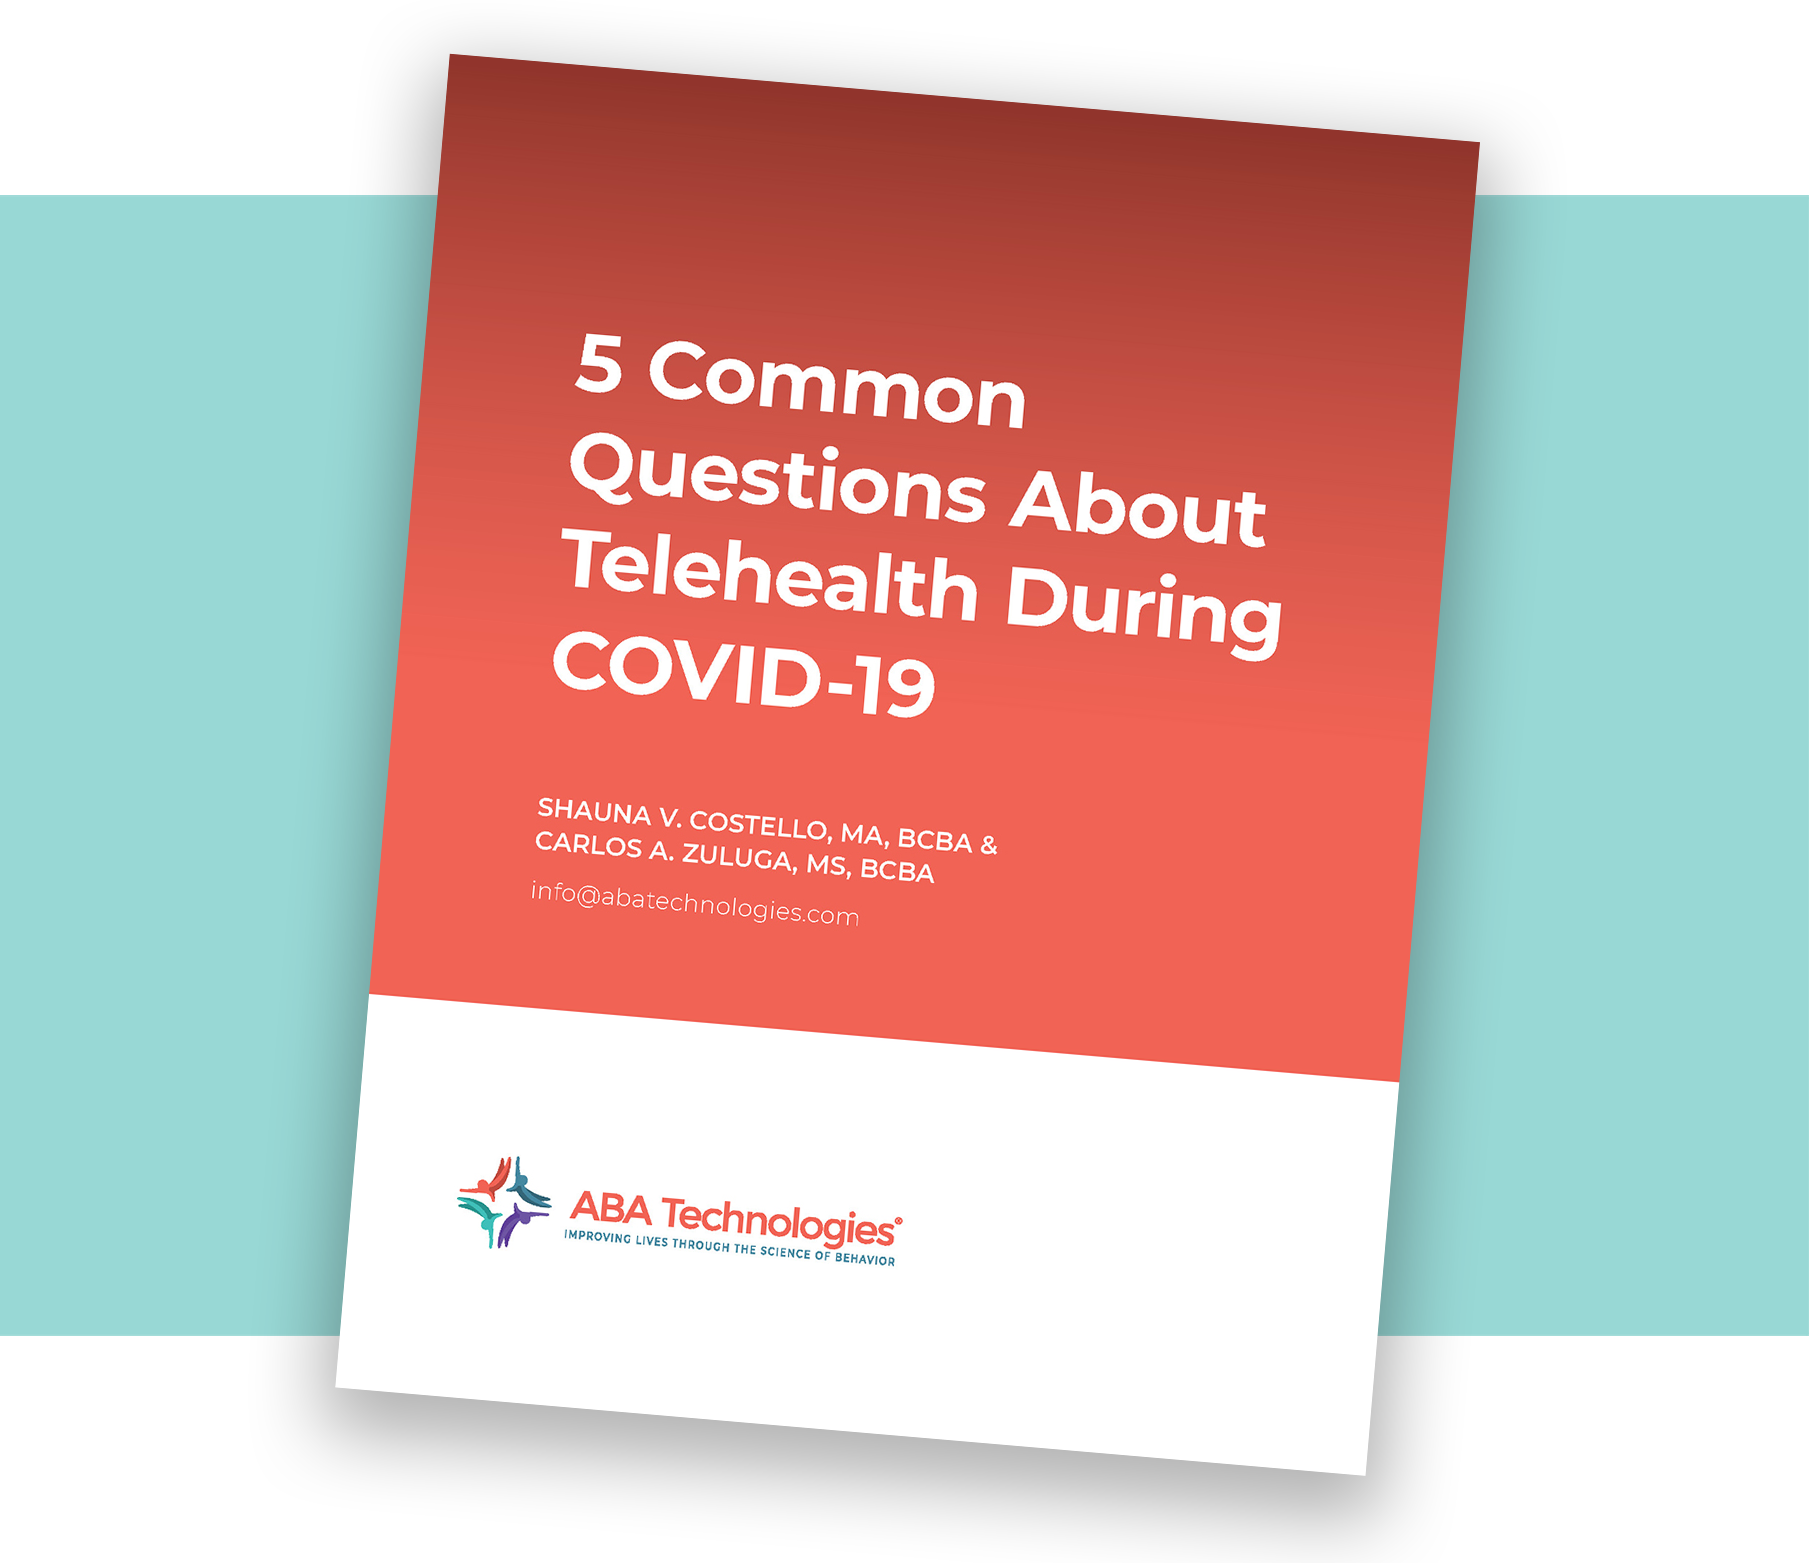 5 Common Questions About Telehealth During COVID-19